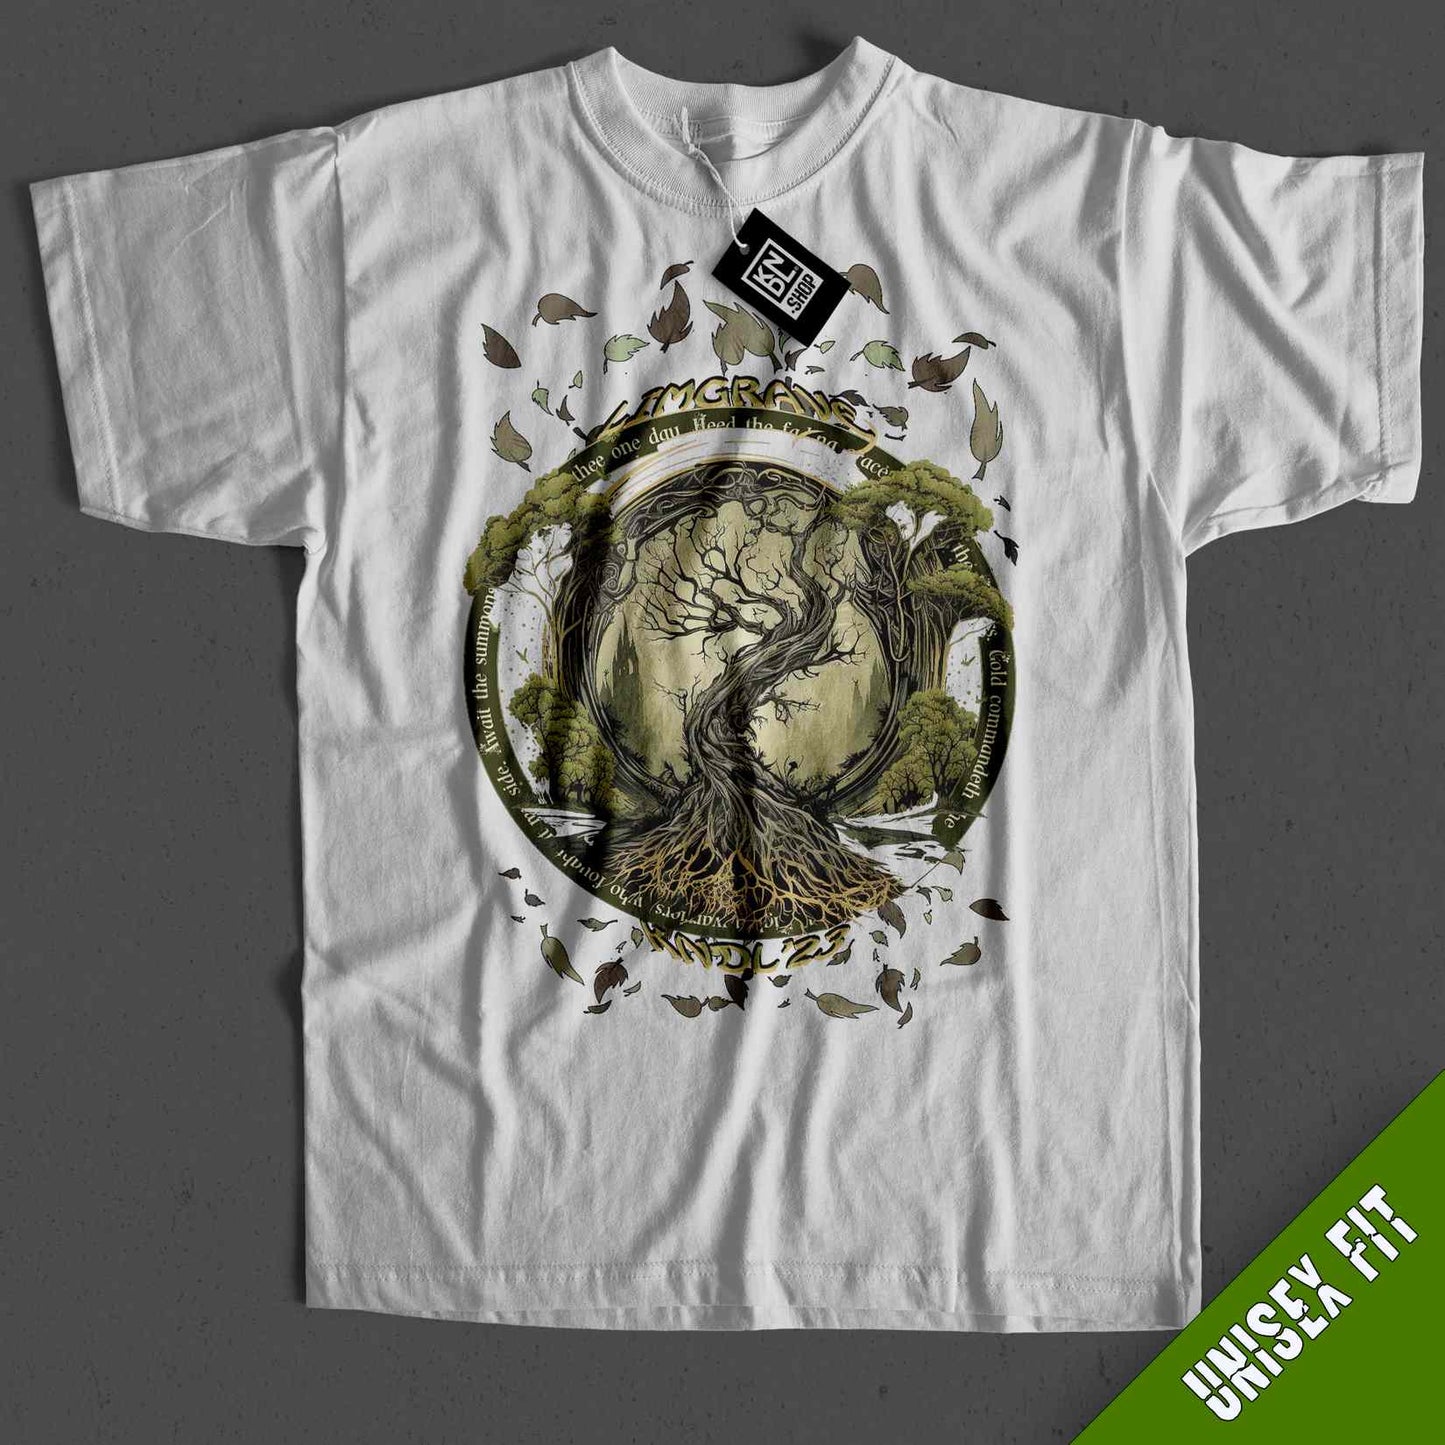 a white t - shirt with a tree on it